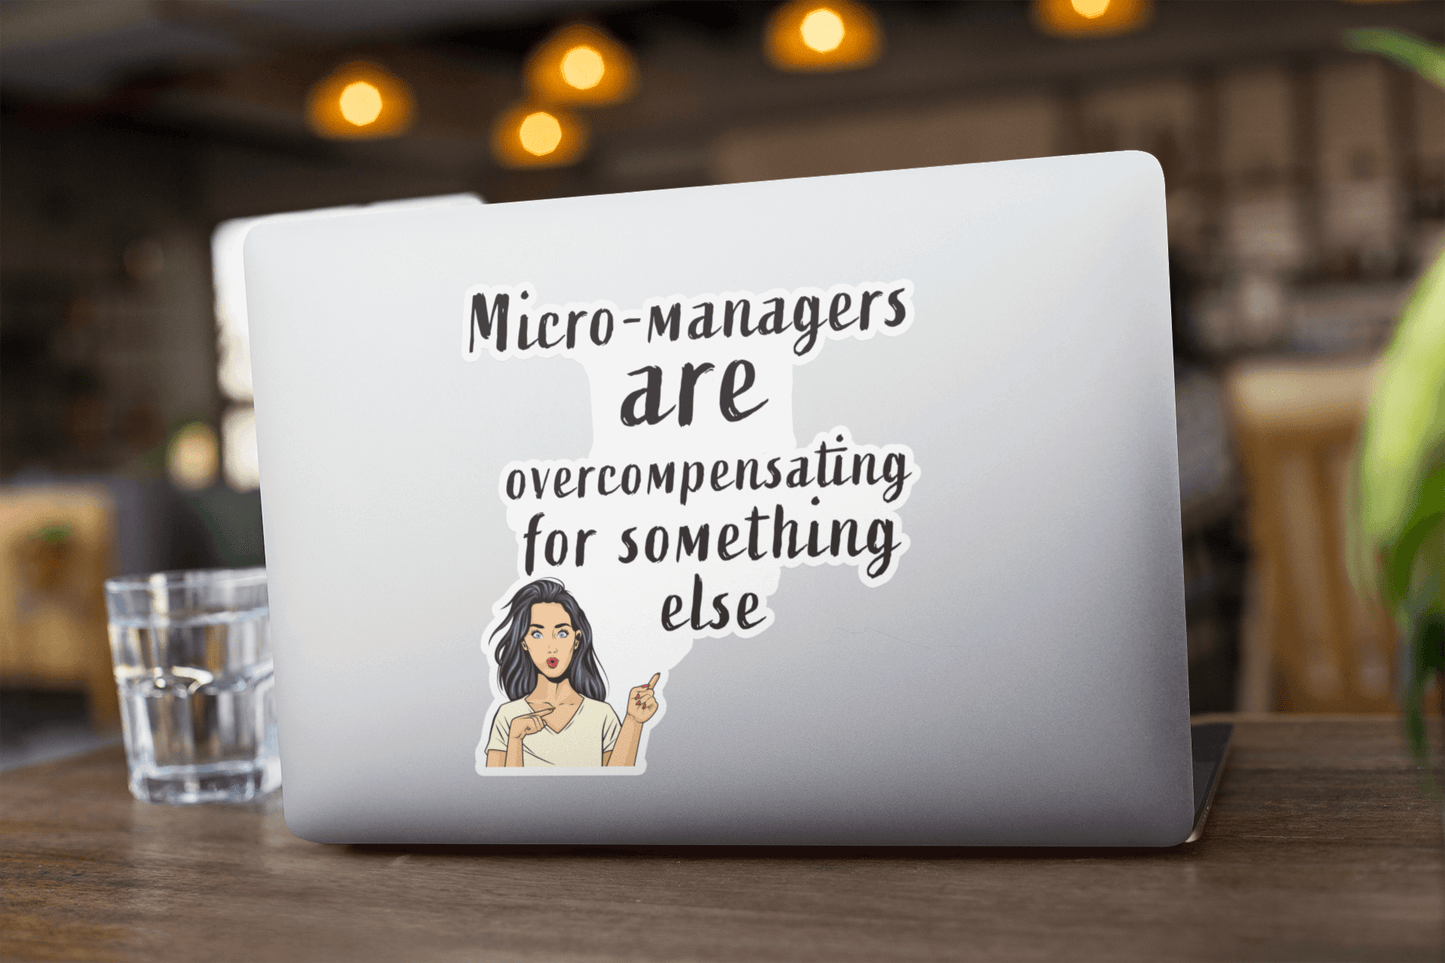 Micro managers are overcompensating for something else - Bubble-free stickers